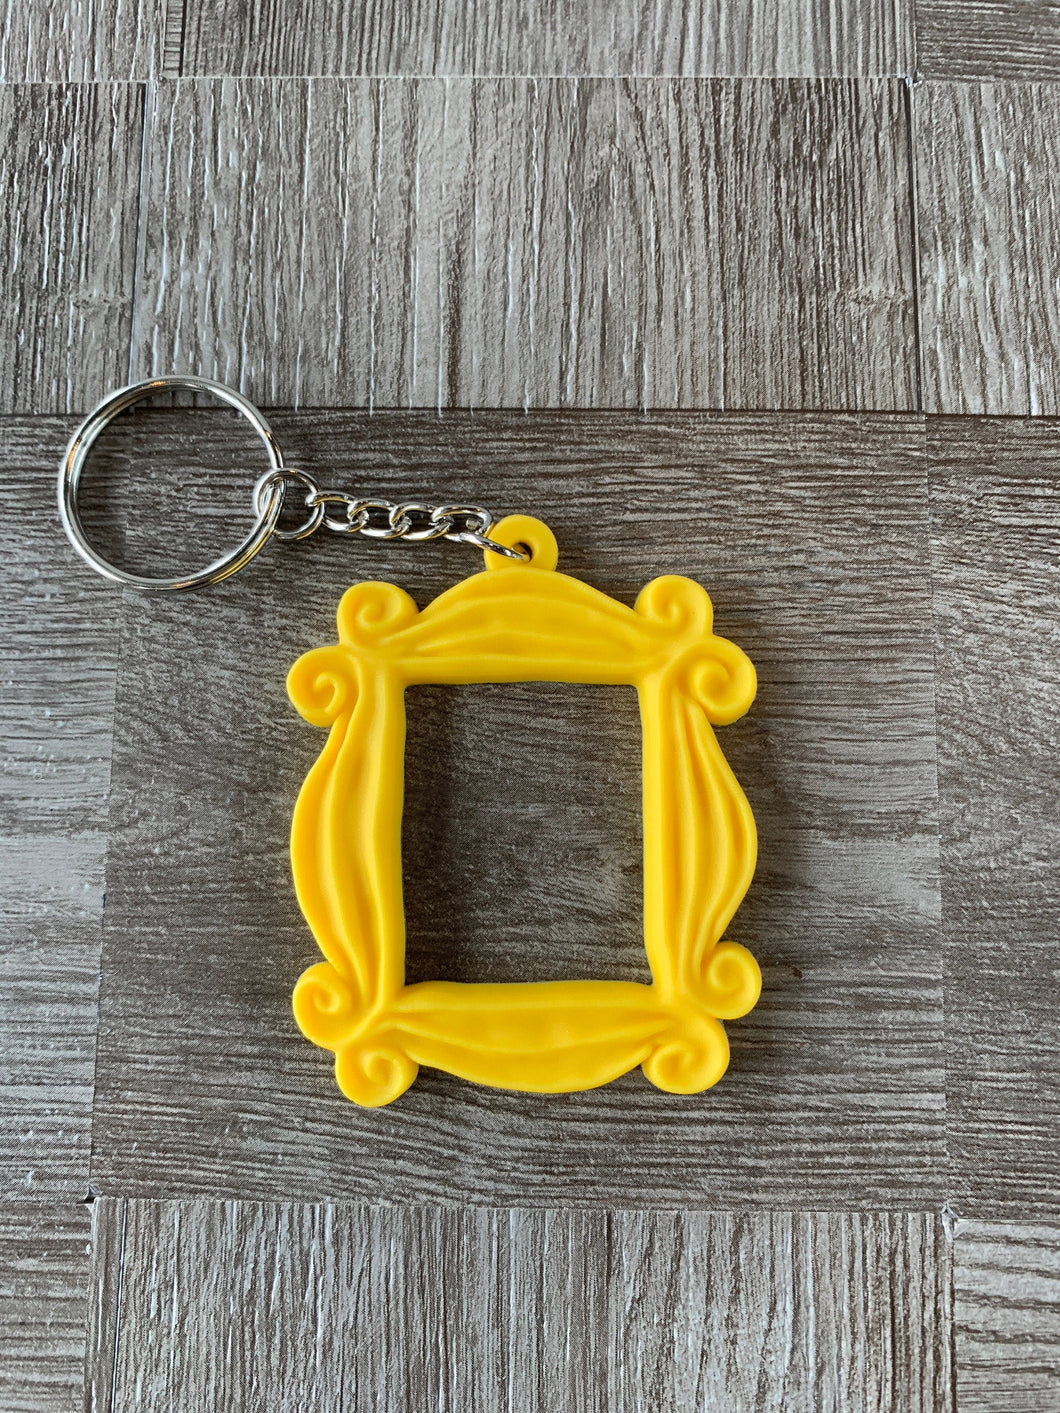 Unbreakable Bendy Friends Peephole Keychain/ Friends Frame/ Yellow Peephole Frame/ Friends Themed Gift/ The One Where